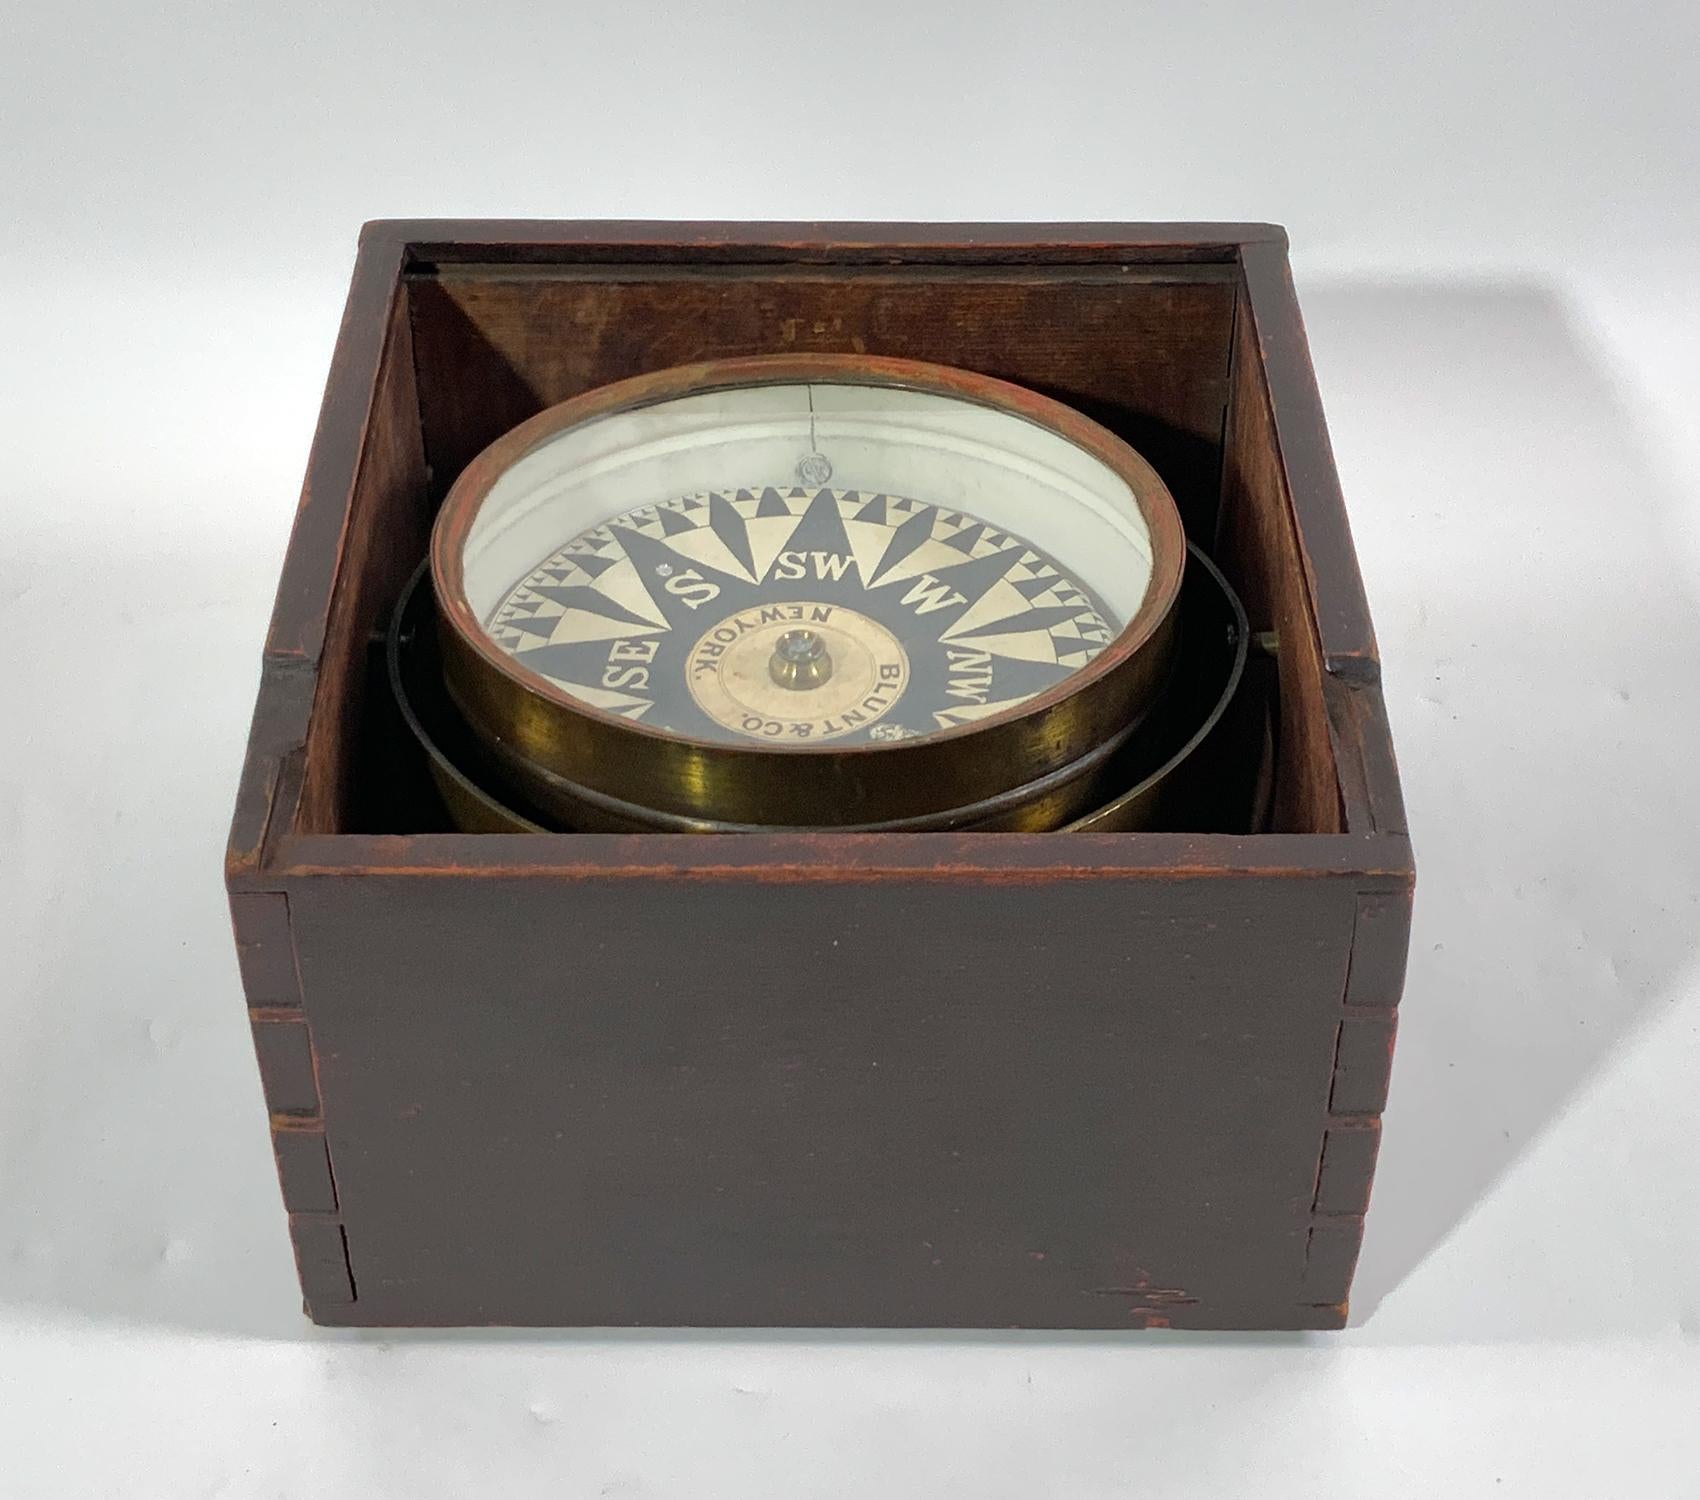 Mid-nineteenth century ships compass by Blunt and Company of New York. The Blunt name was involved in the maritime trade from 1824 to 1885. The name Blunt and Co. was used from 1868 to 1872 by Edmund Blunt Jr. This is a spun brass bowl compass